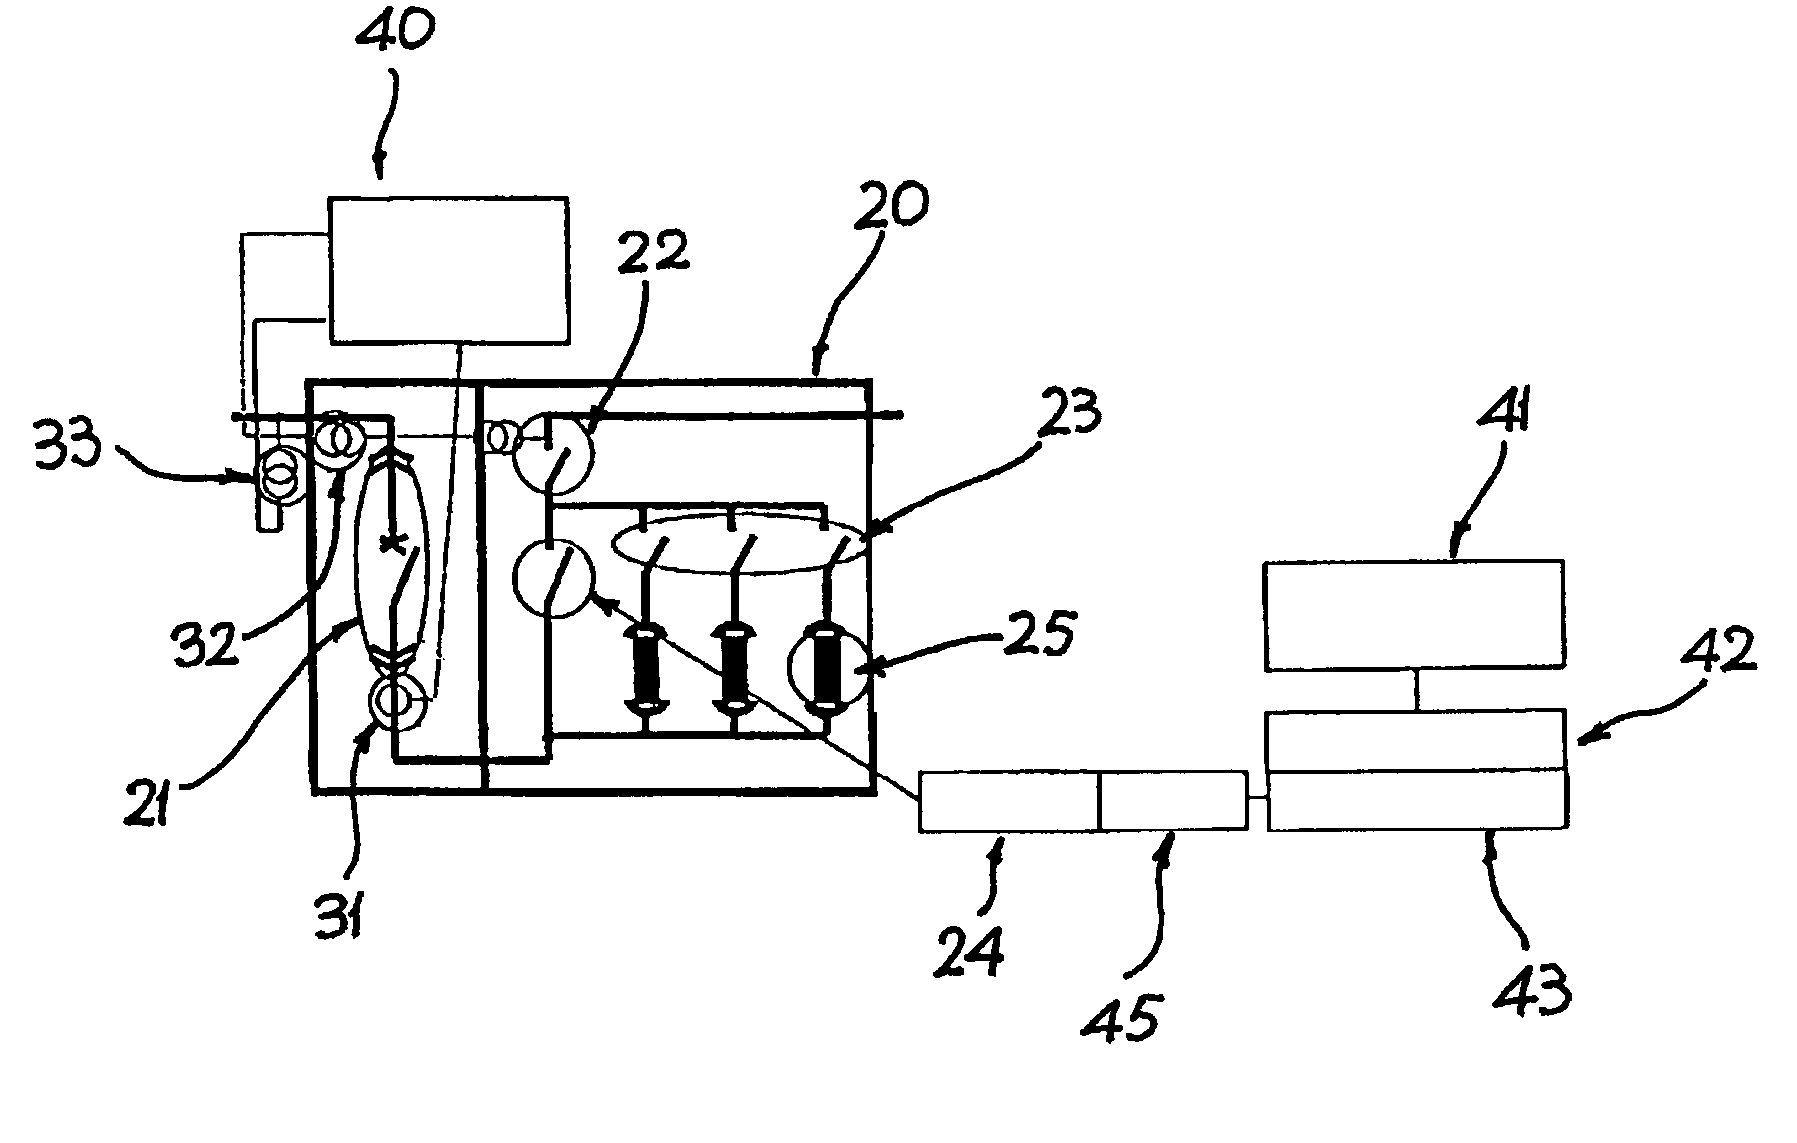 Fault current limiting system and method